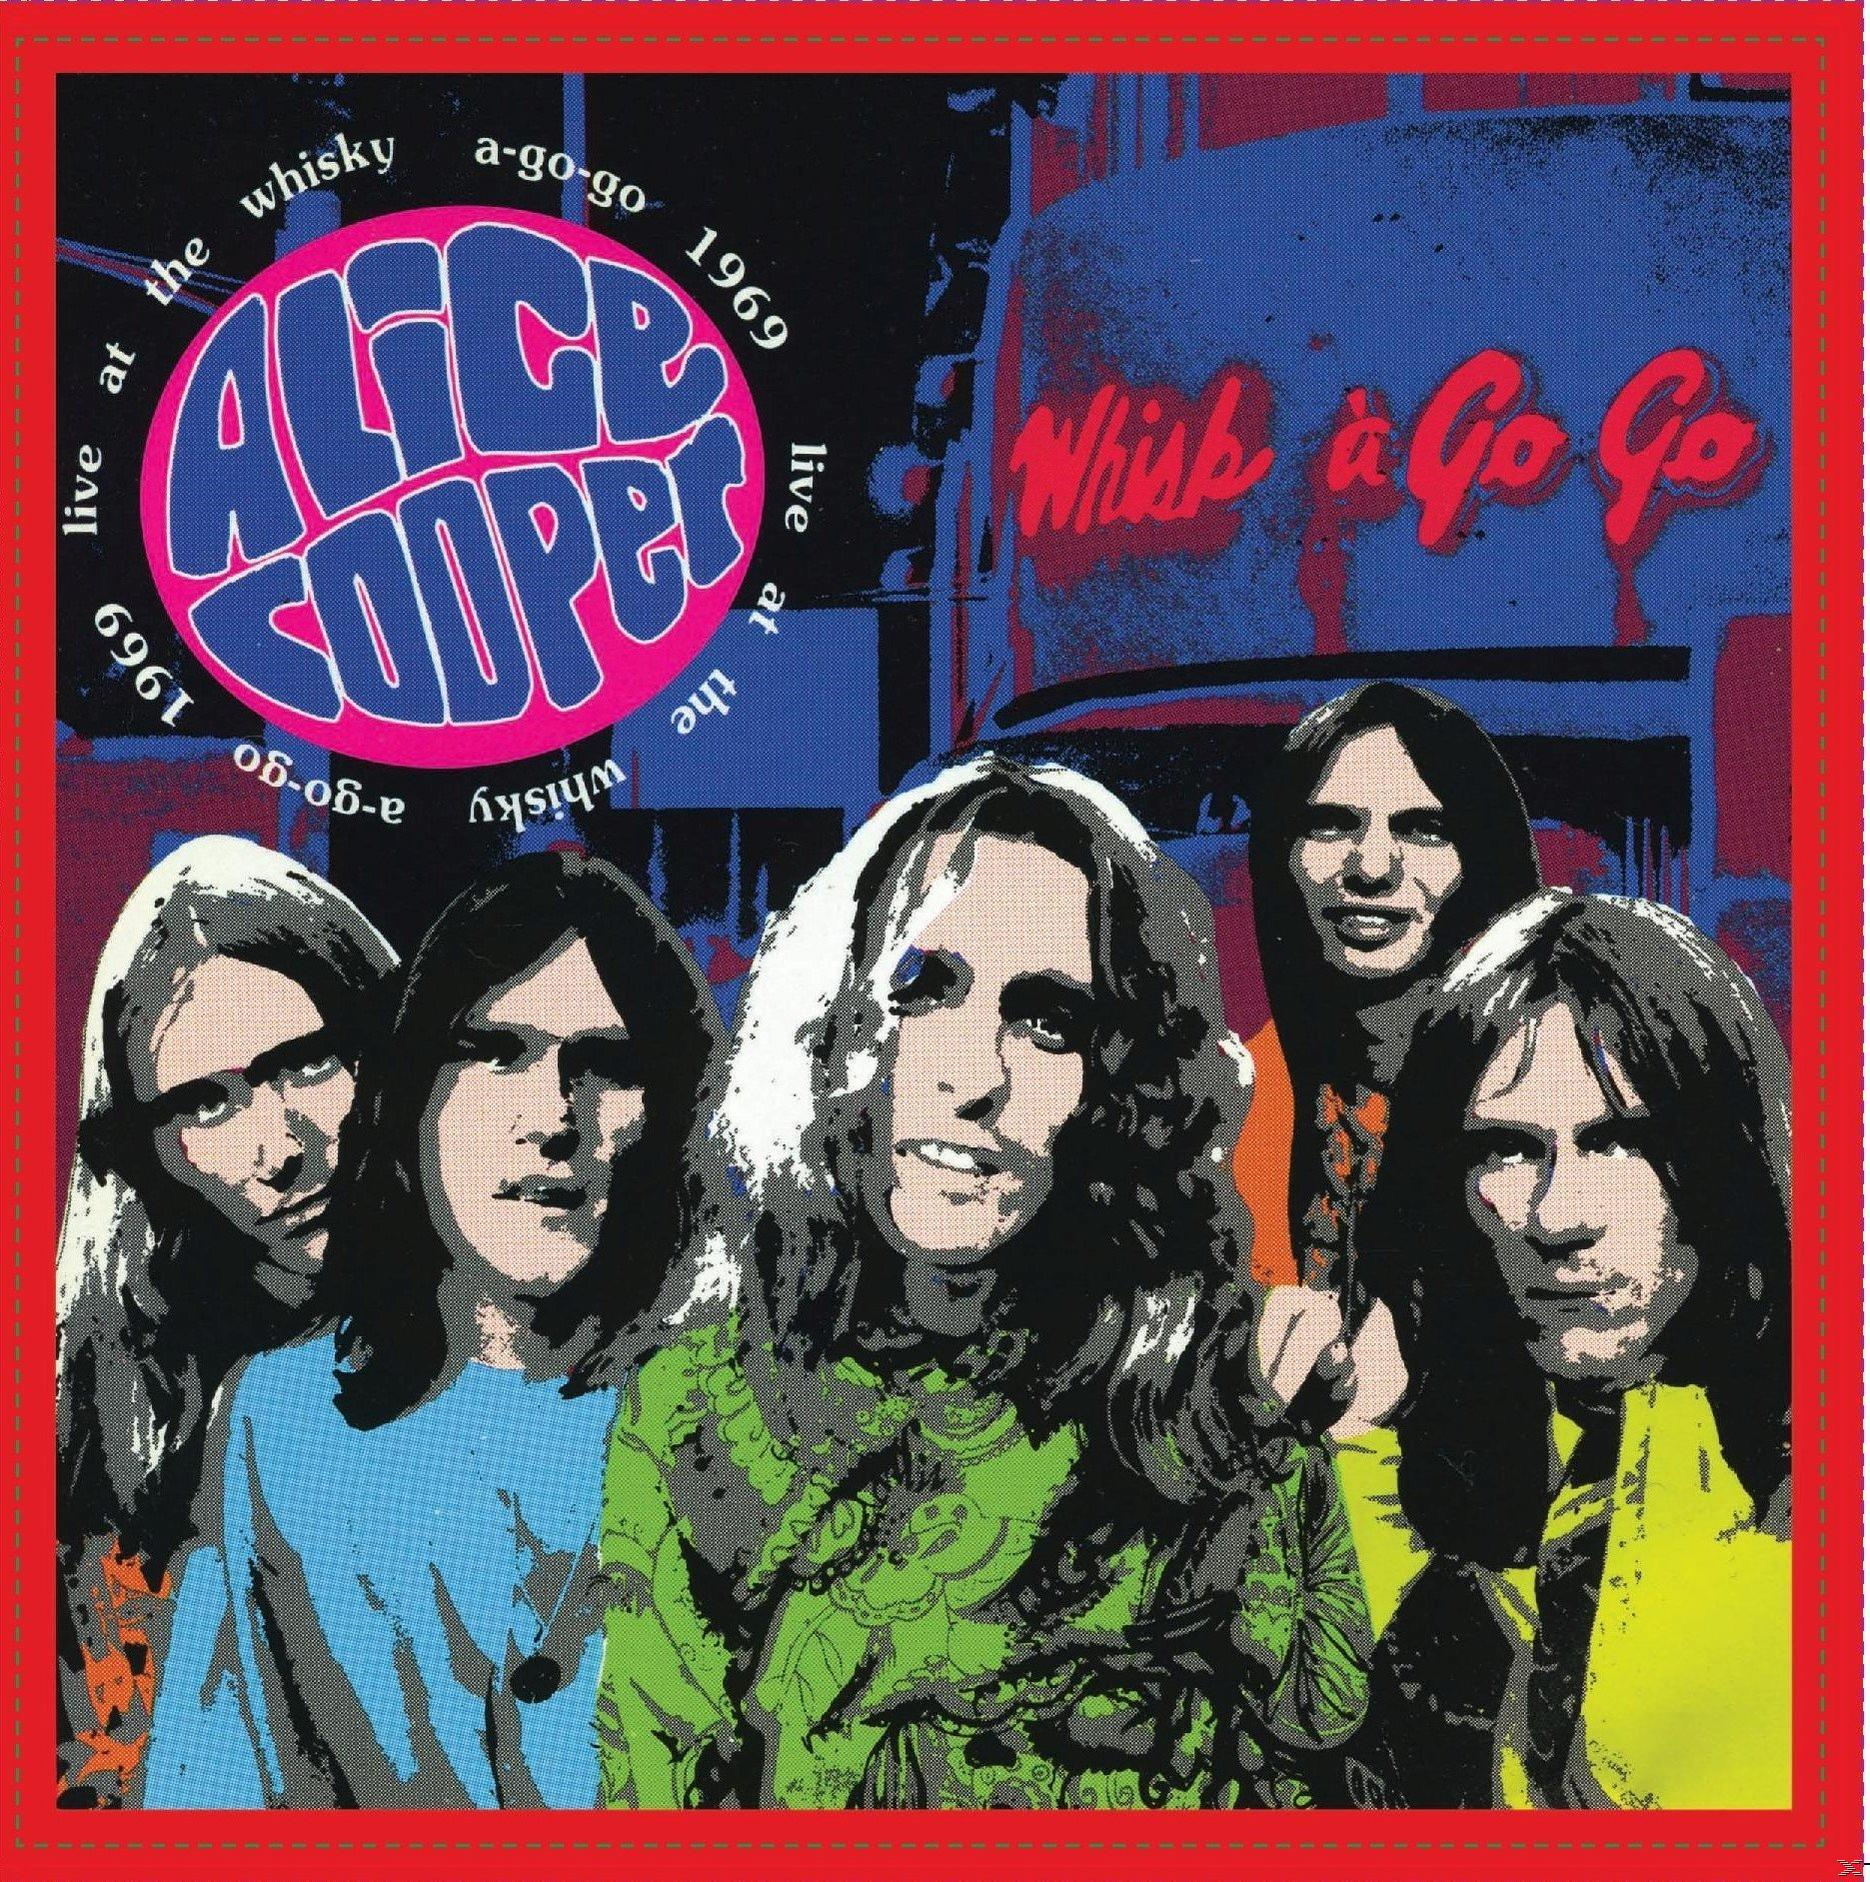 Alice Cooper - 1969 Whiskey - Live Go-Go, The A (Vinyl) At